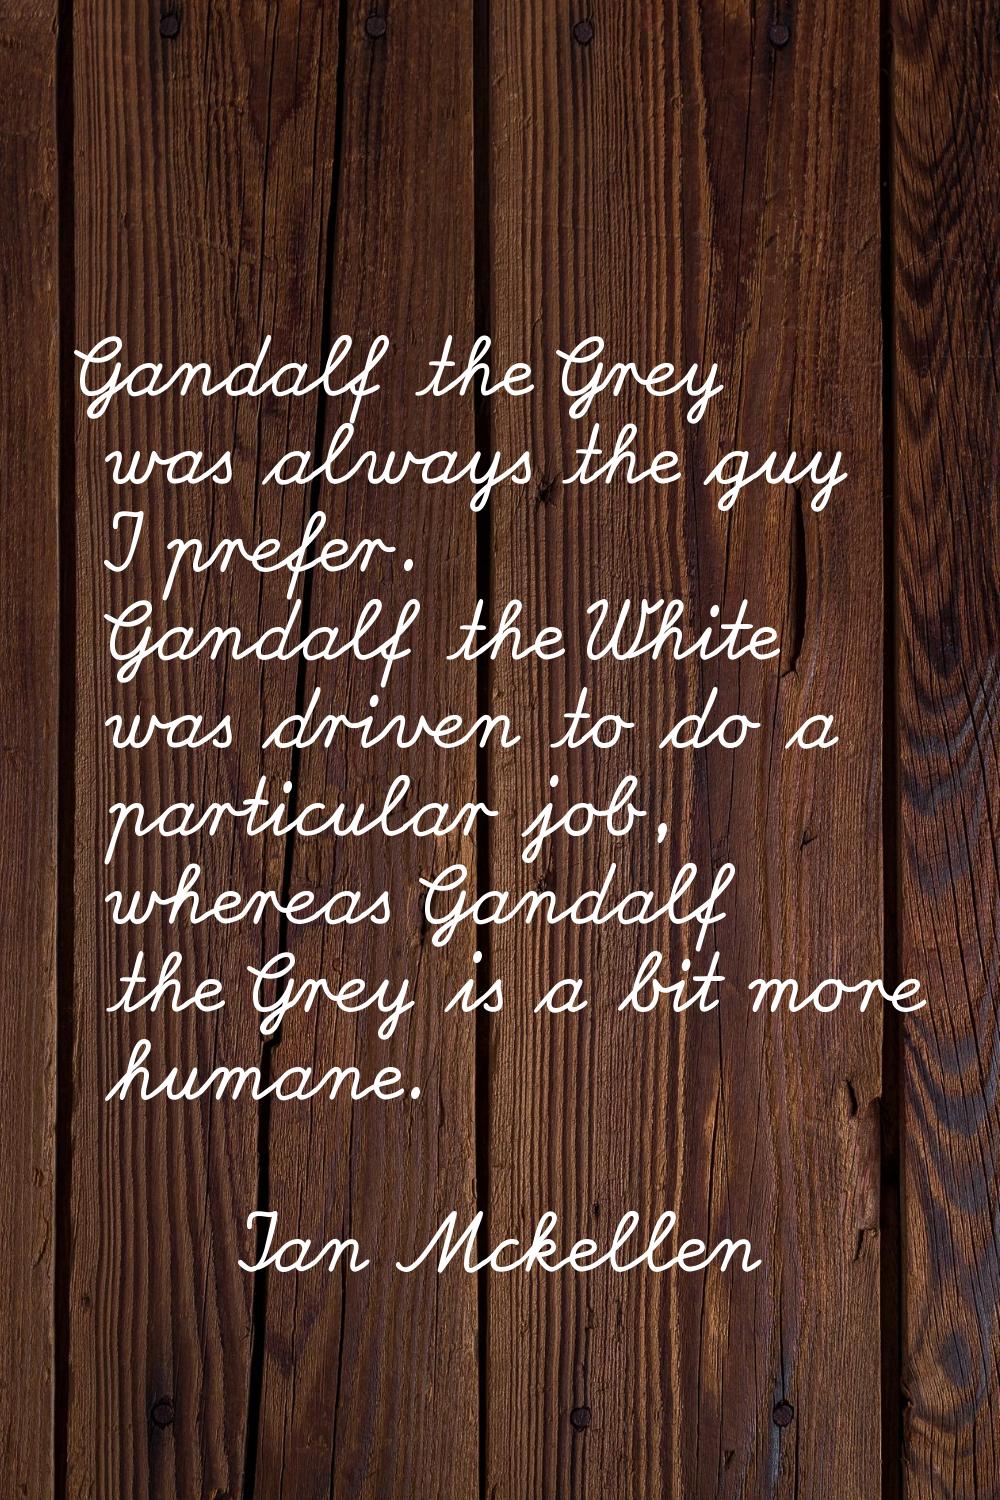 Gandalf the Grey was always the guy I prefer. Gandalf the White was driven to do a particular job, 